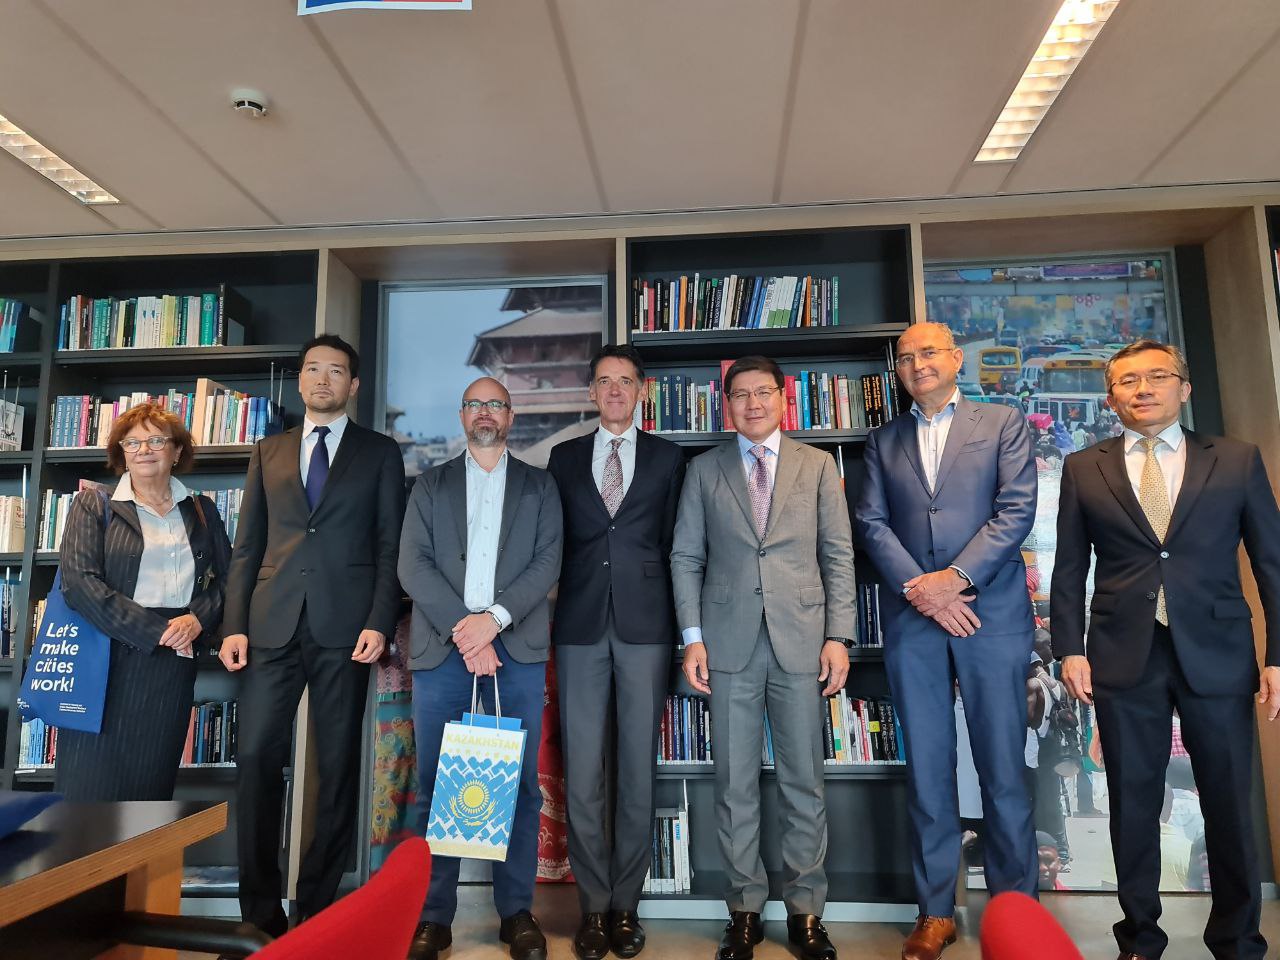 Askar Zhumagaliyev discussed urbanization issues in Kazakhstan with the Netherlands experts